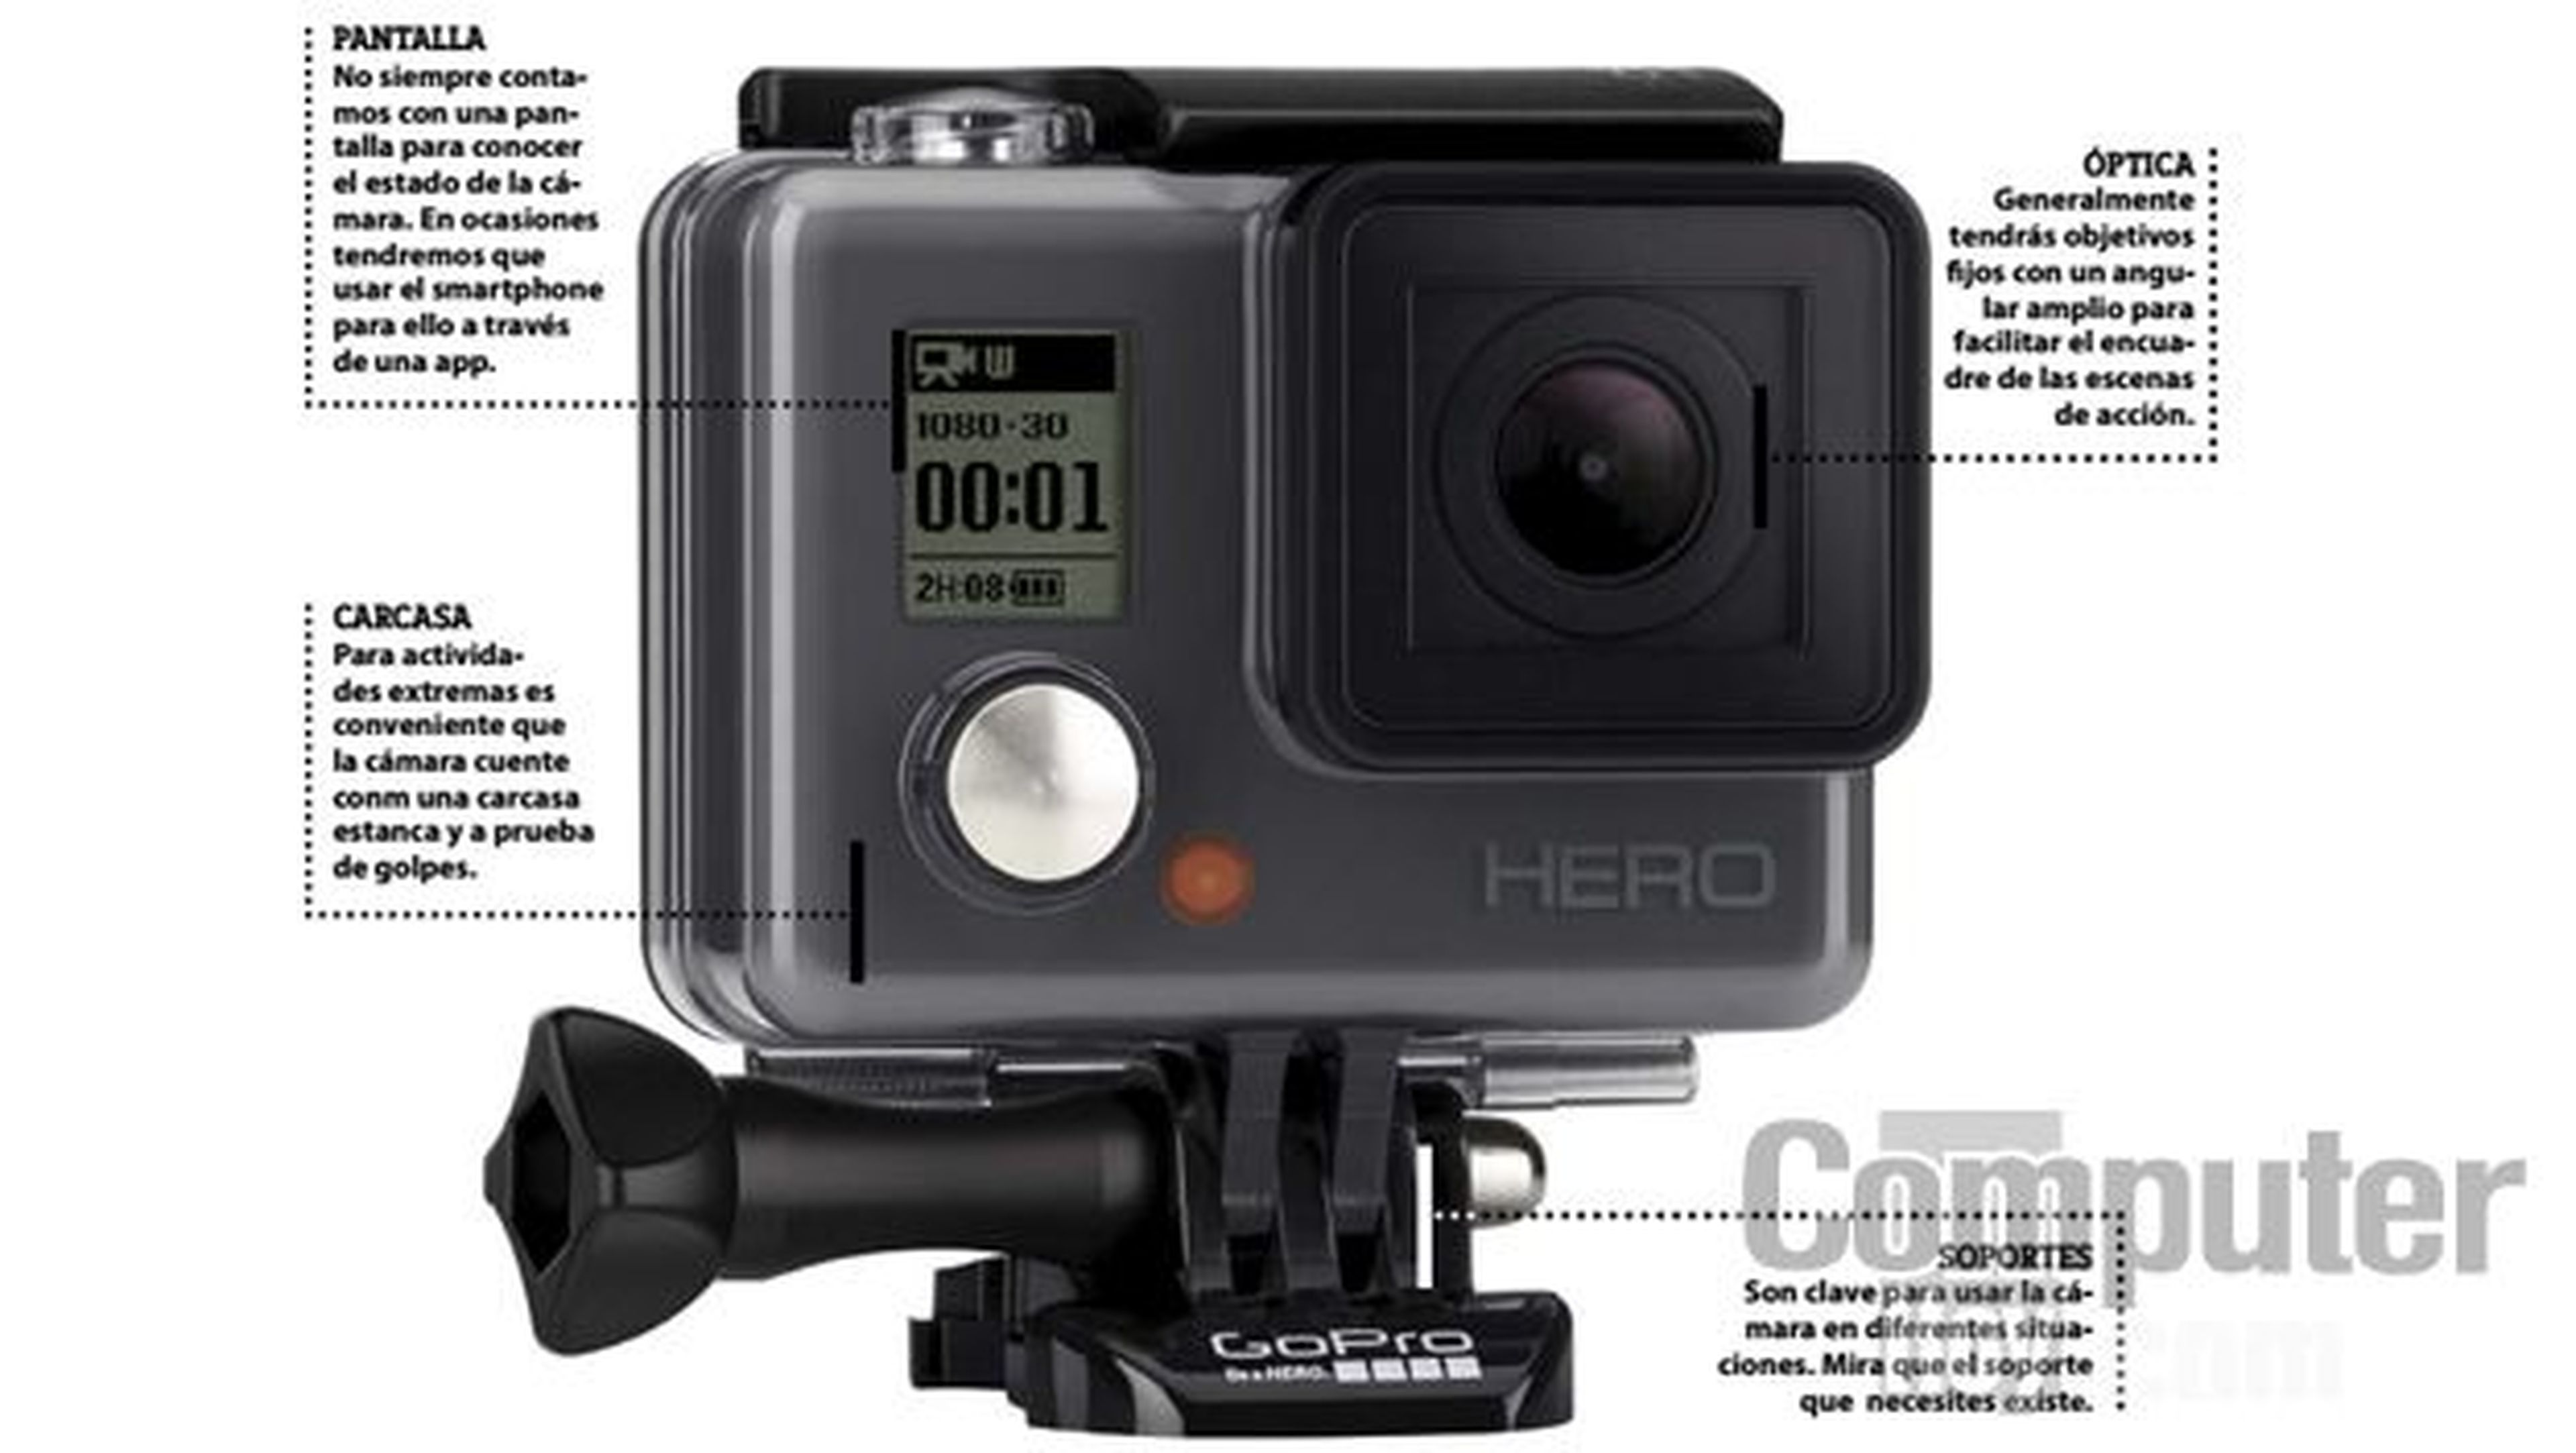 action camera buying guide